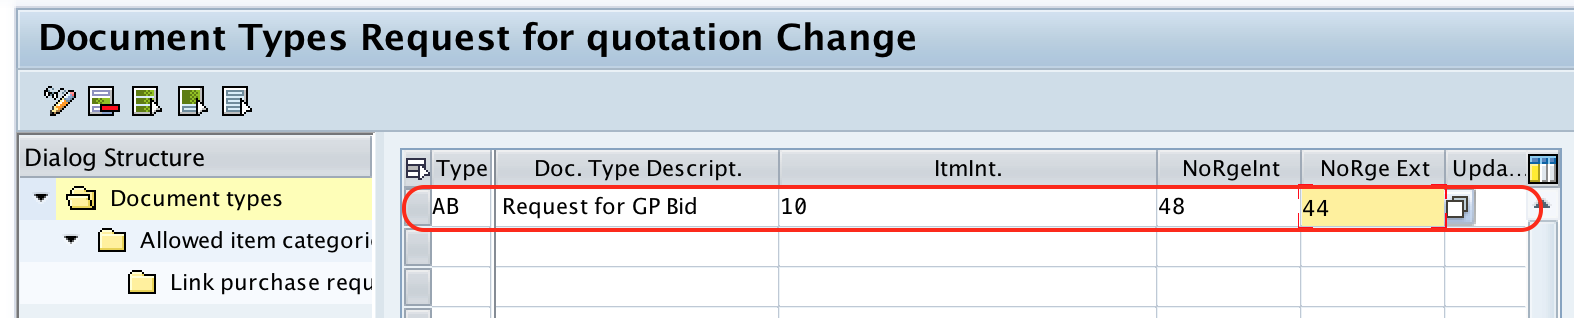 Define Document Types for RFQ - Quotation